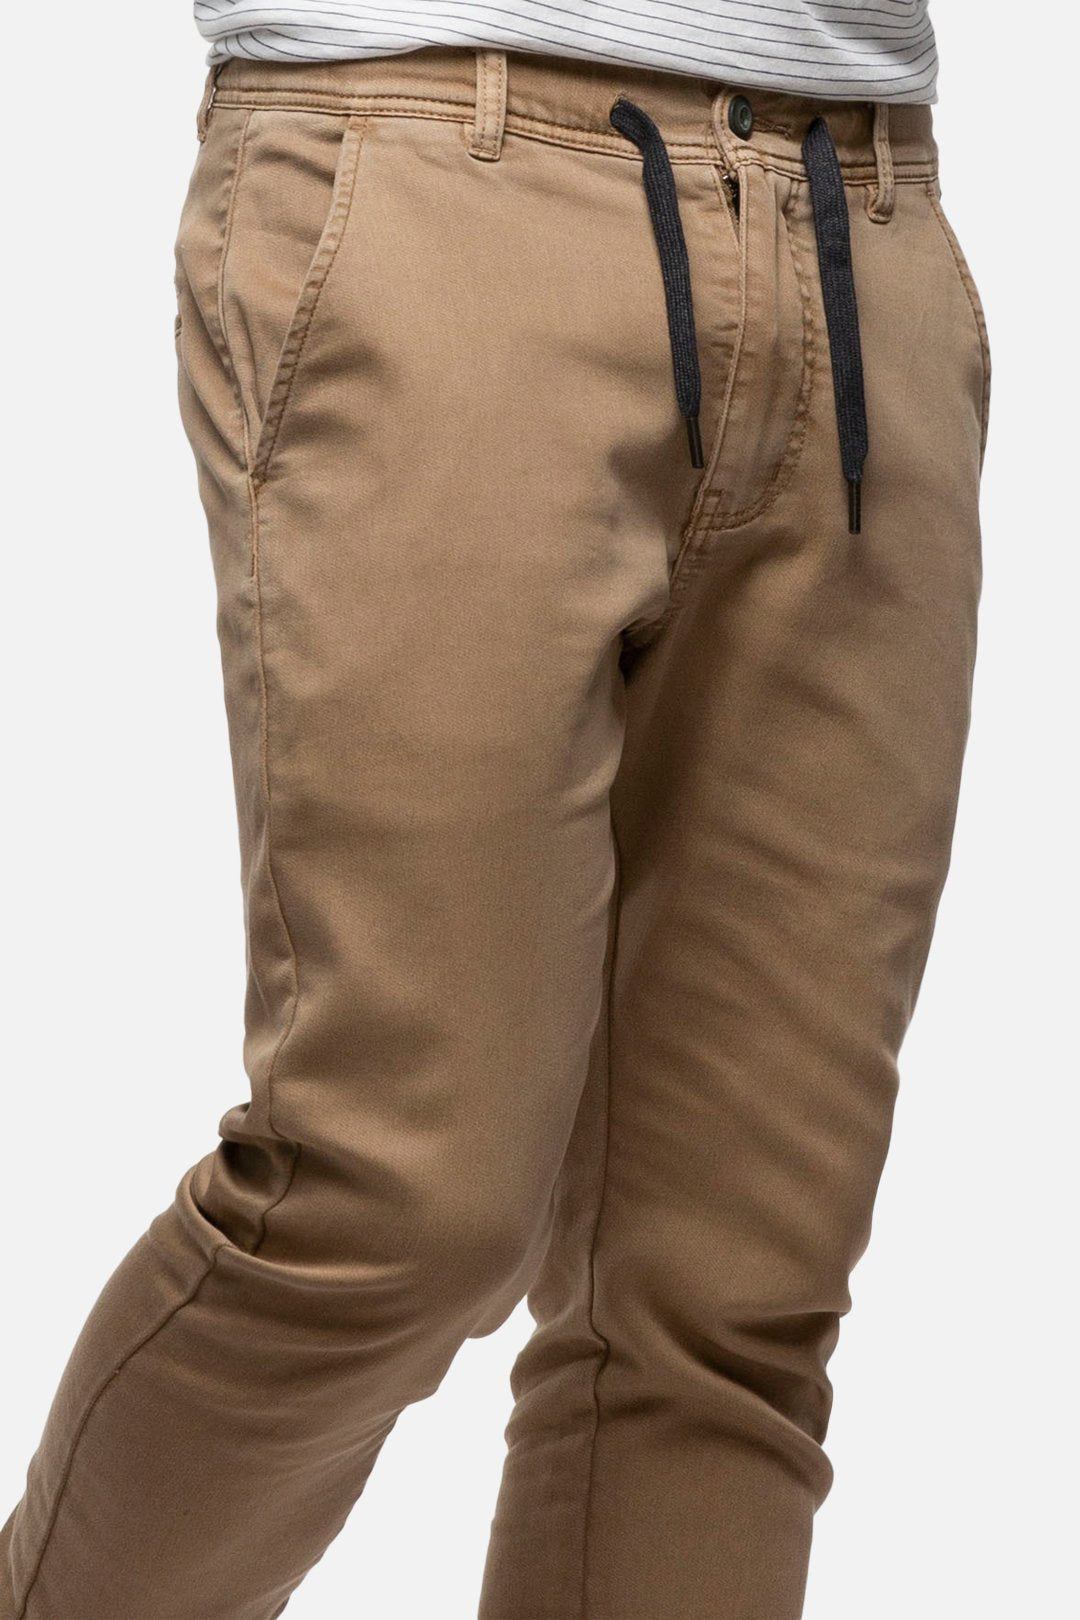 INDUSTRIE - The Drifter Chino Pant - NEW CINNAMON